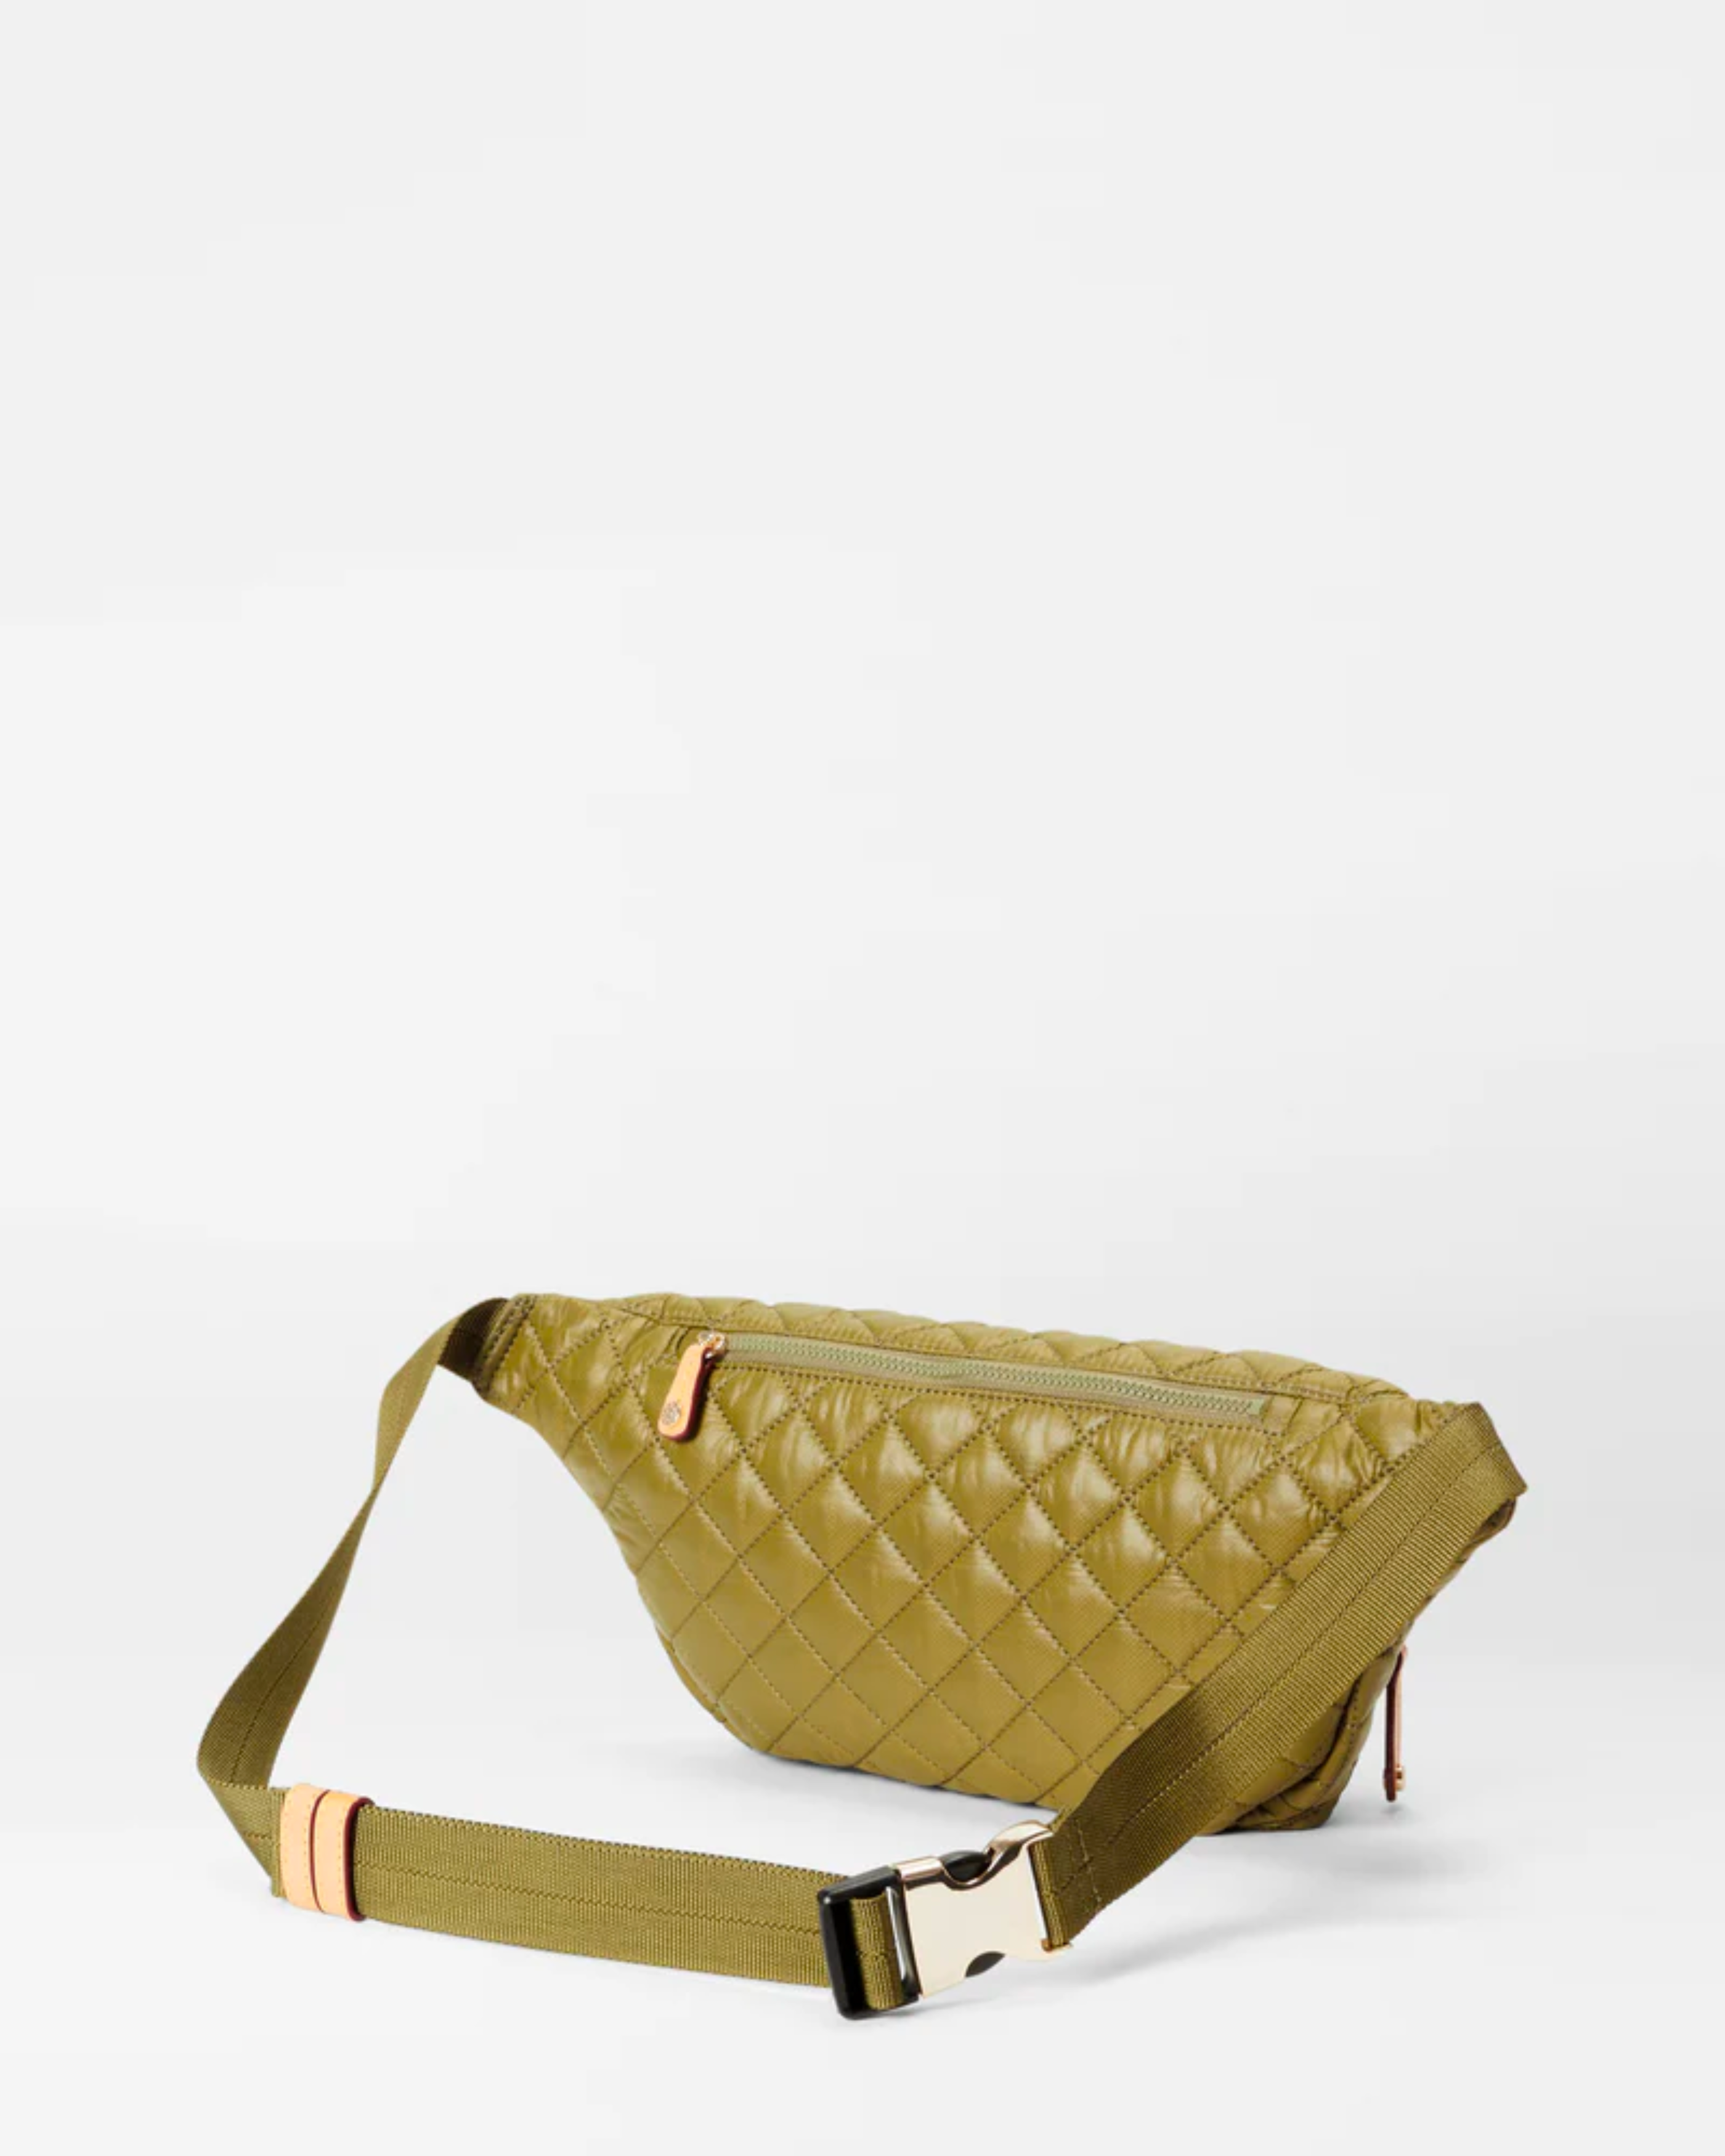 MZ Wallace Small Metro Sling in Moss